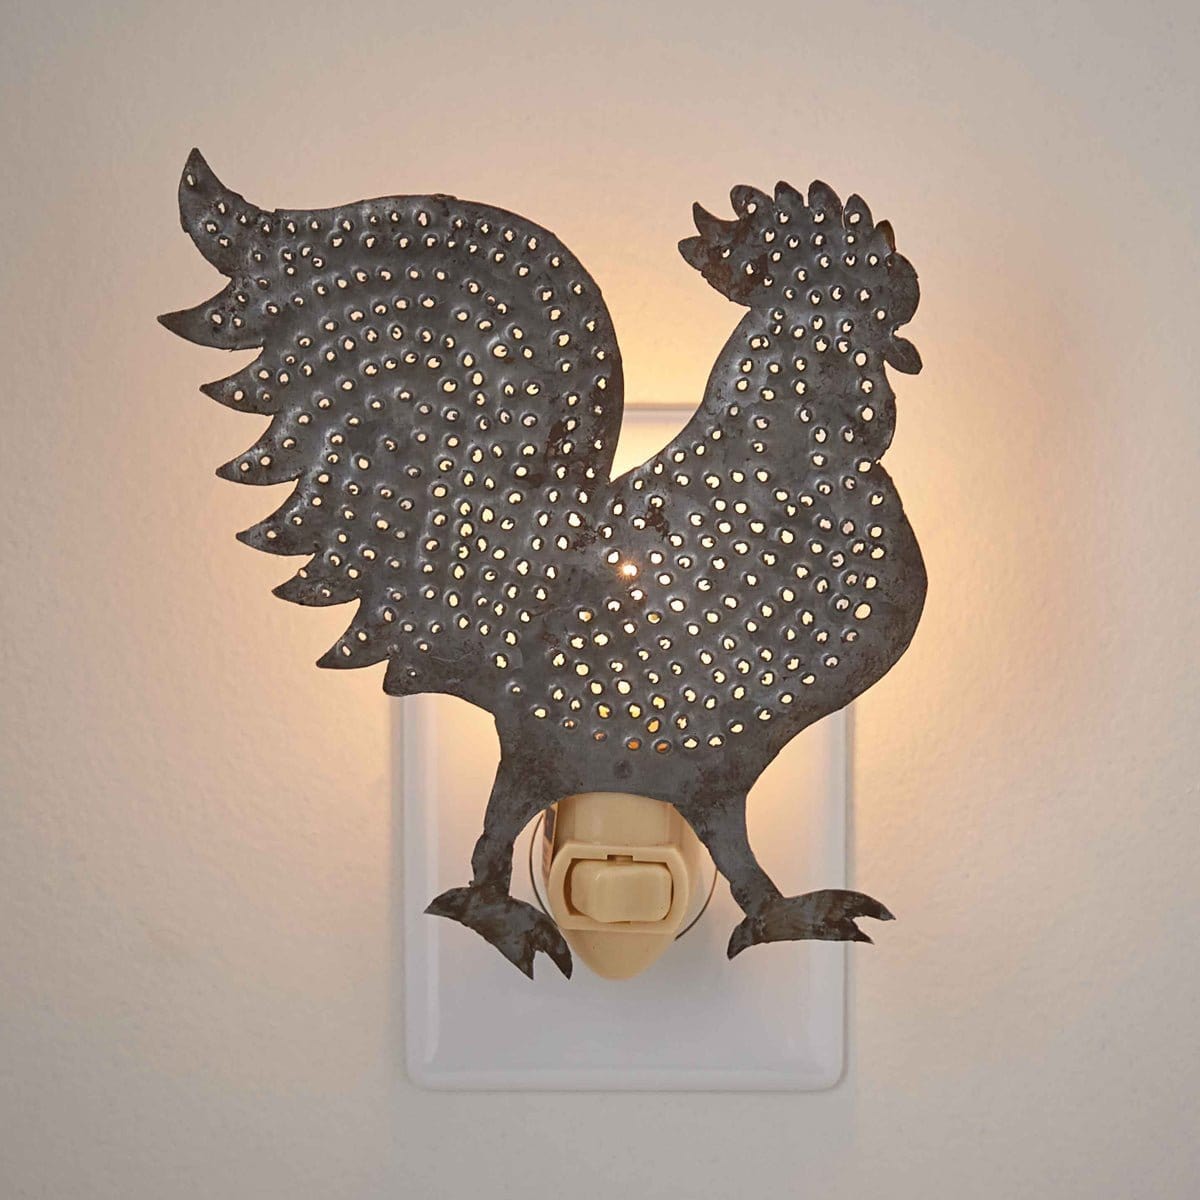 Galvanized Metal Punched Tin Rooster Night Light-Park Designs-The Village Merchant